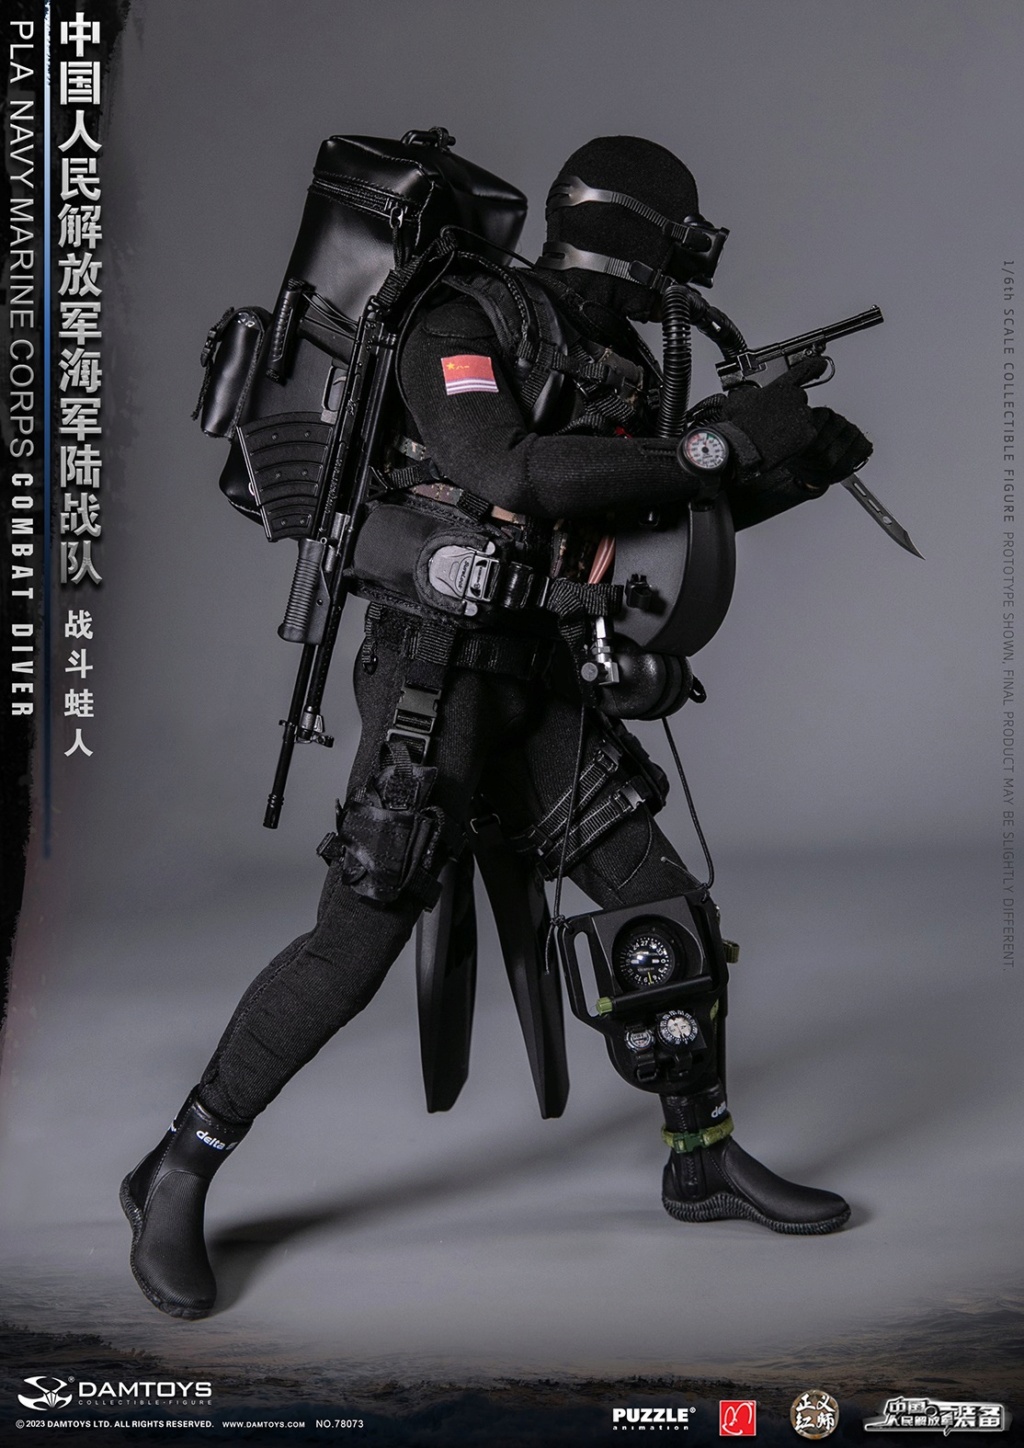 NEW PRODUCT: DAMToys: 1/6 Chinese People's Liberation Army Marine Corps - Combat Frogman Action Figure #78073 14301311